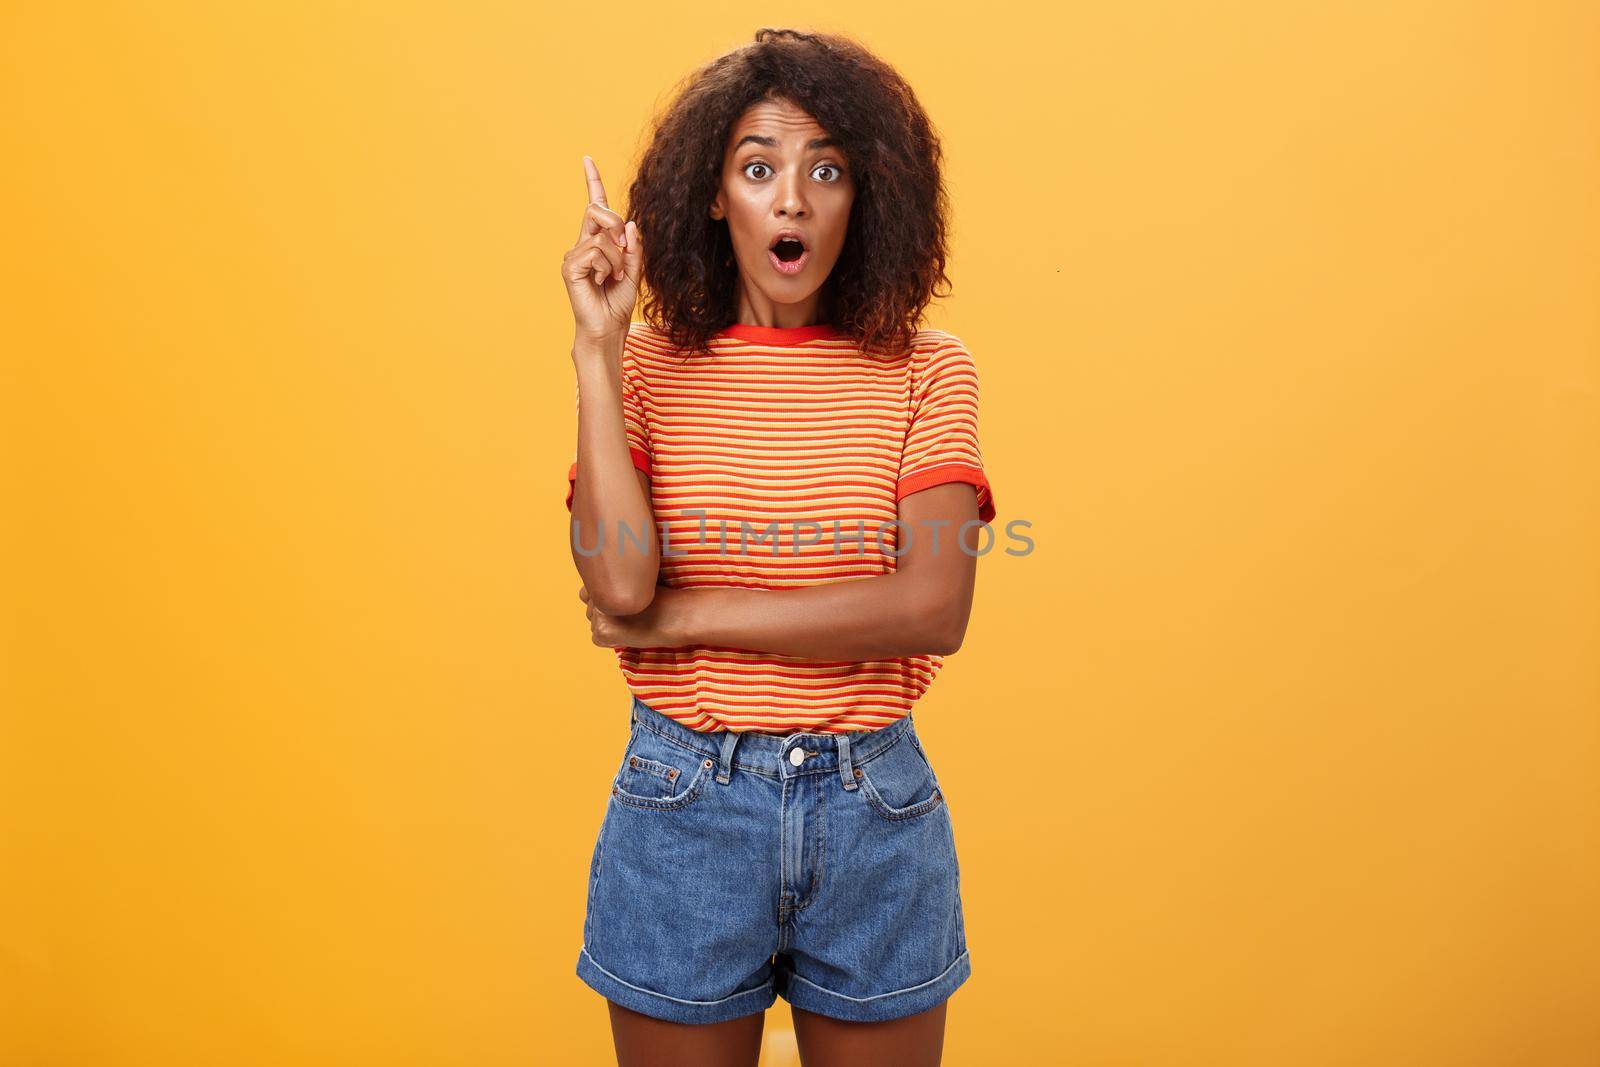 Girl finally understood riddle adding suggestion outloud. Excited thrilled good-looking dark-skinned woman staring amazed raising index finger in eureka gesture having idea over orange wall. Emotions and body language concept